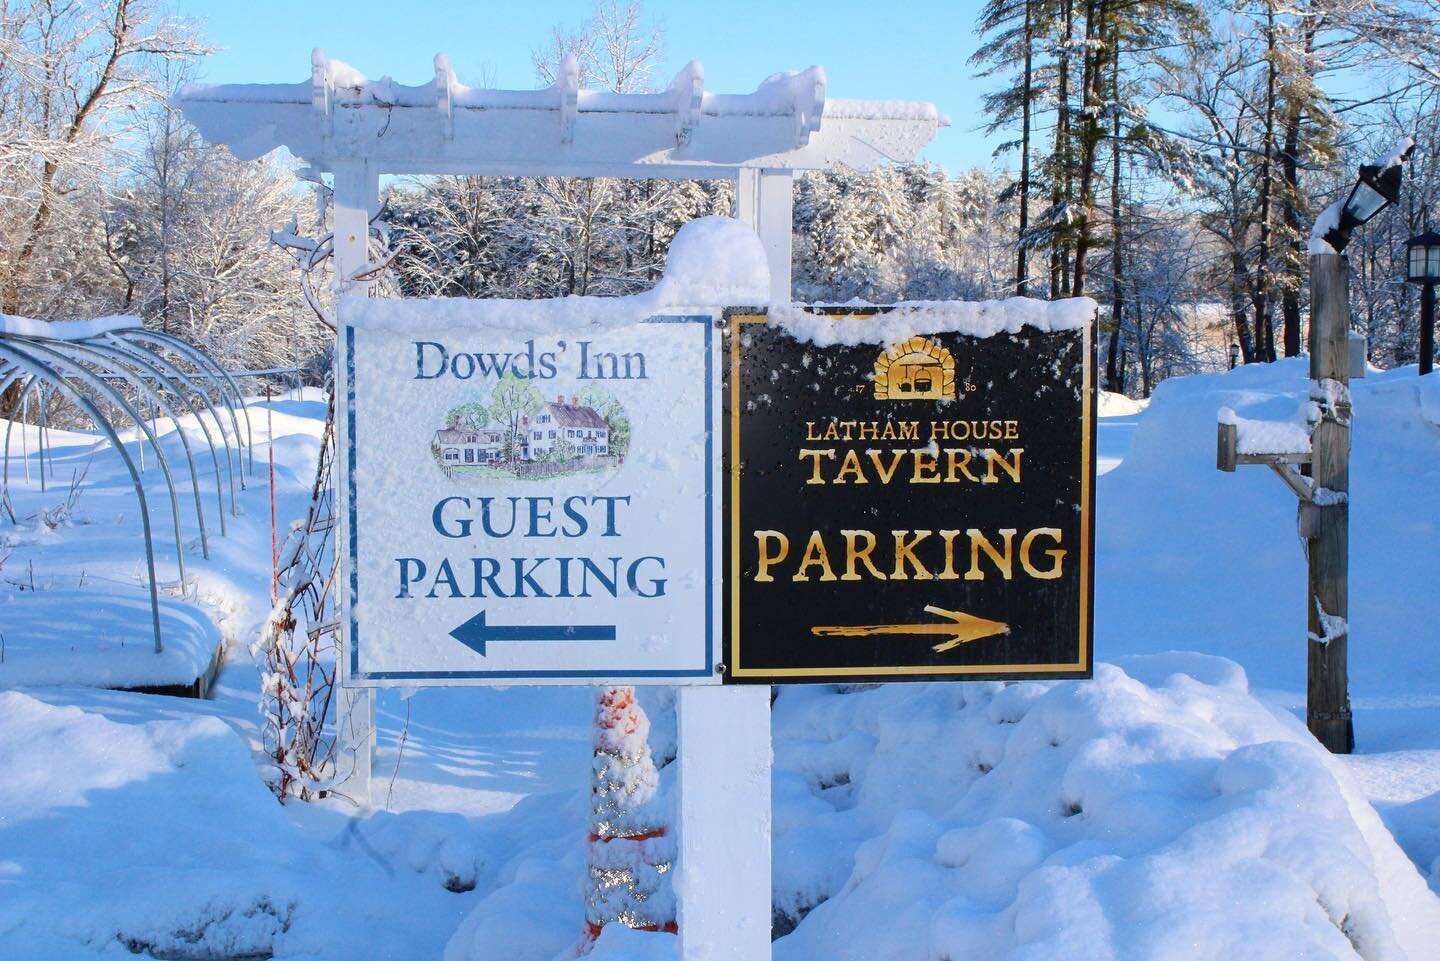 Local? Come enjoy the tavern! Out of towner? Stay &amp; enjoy the tavern! Call us for room rates &amp; specials! 
#dowdscountryinn #lathamhousetavern #goodfood #tavern #lymenh #travelnh